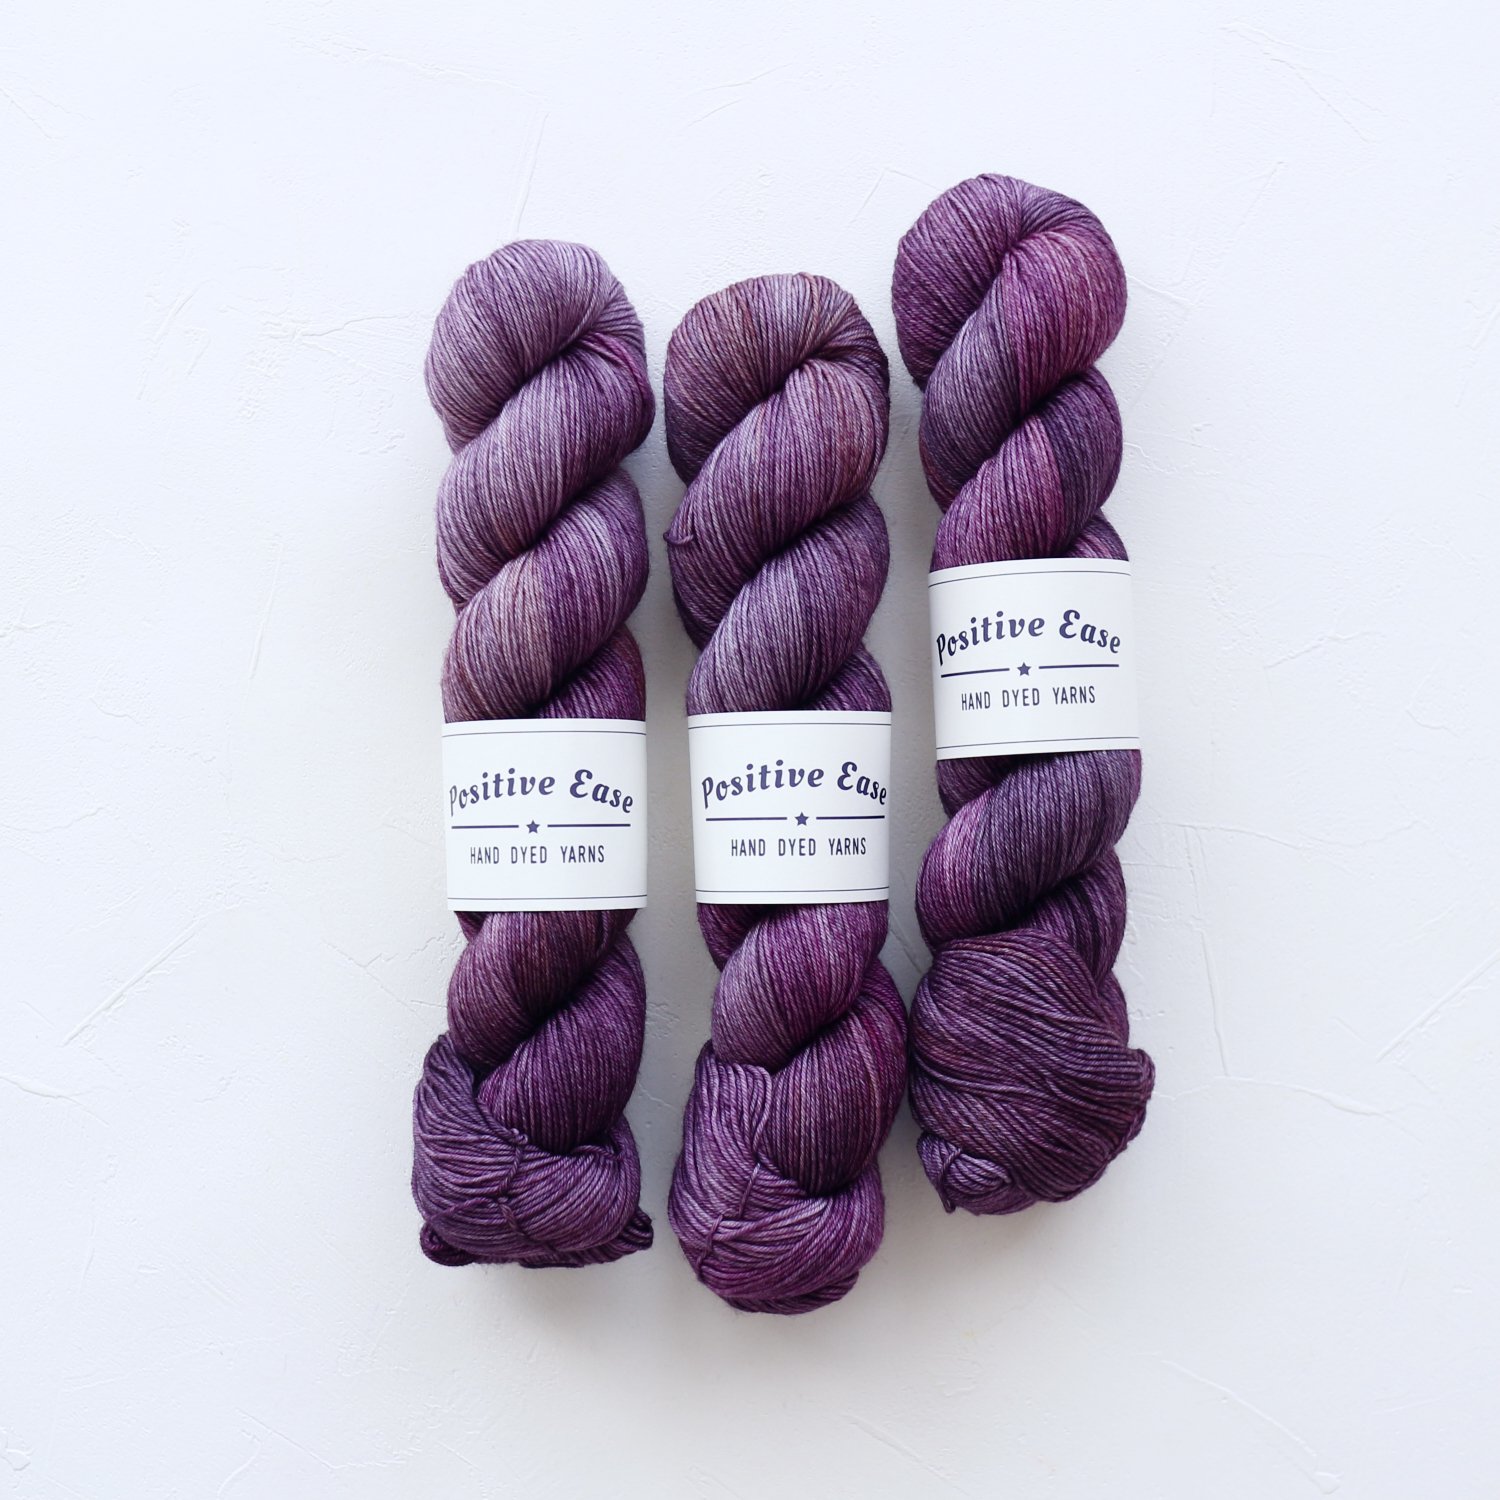 Positive Ease<br>Pure Merino<br>Groovy Beans